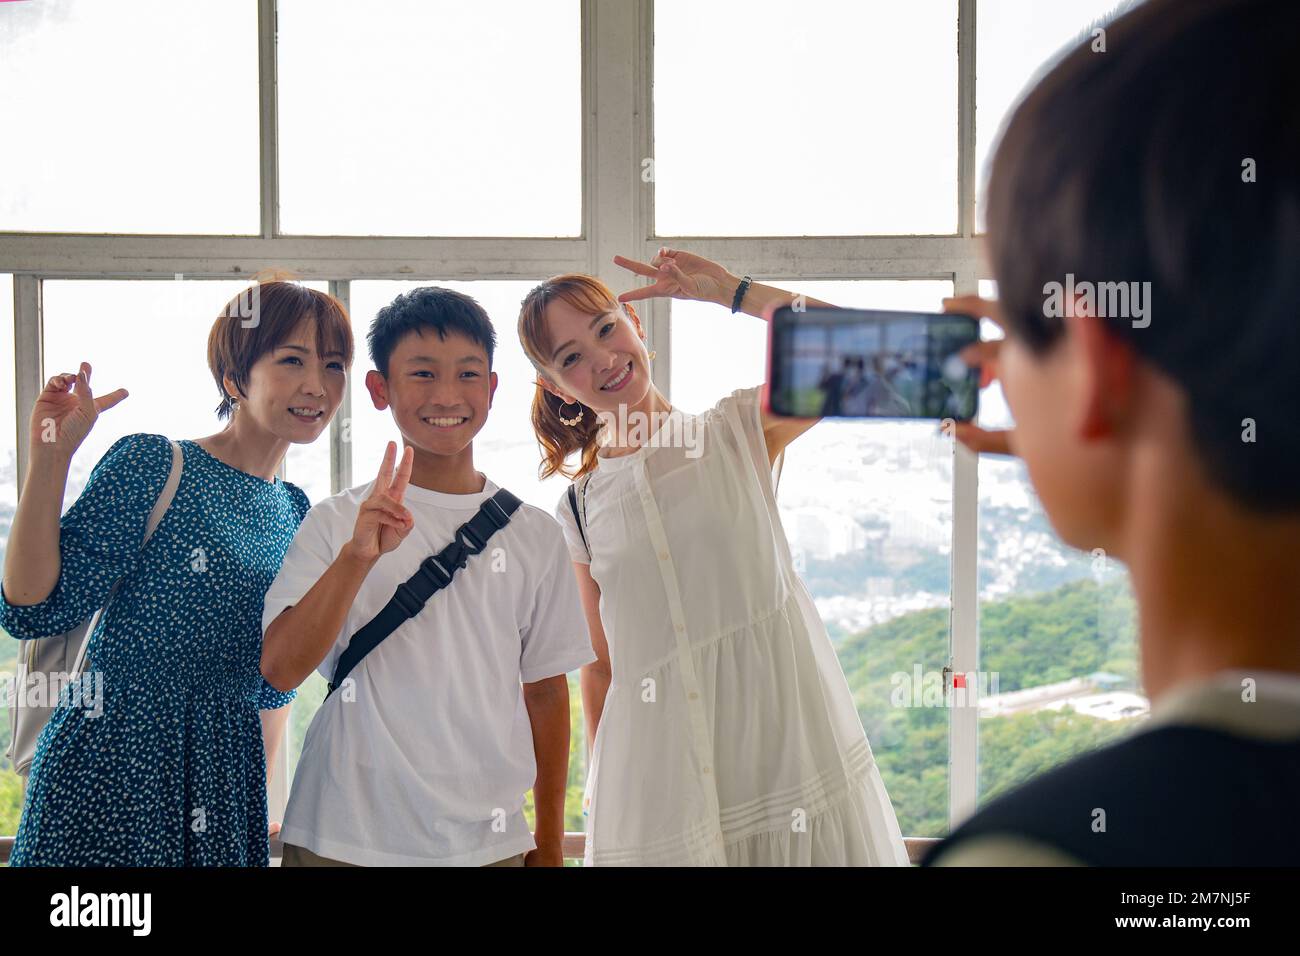 A boy using his mobile phone to take a picture of three people, a 13 year old boy, his mother and a friend. Stock Photo